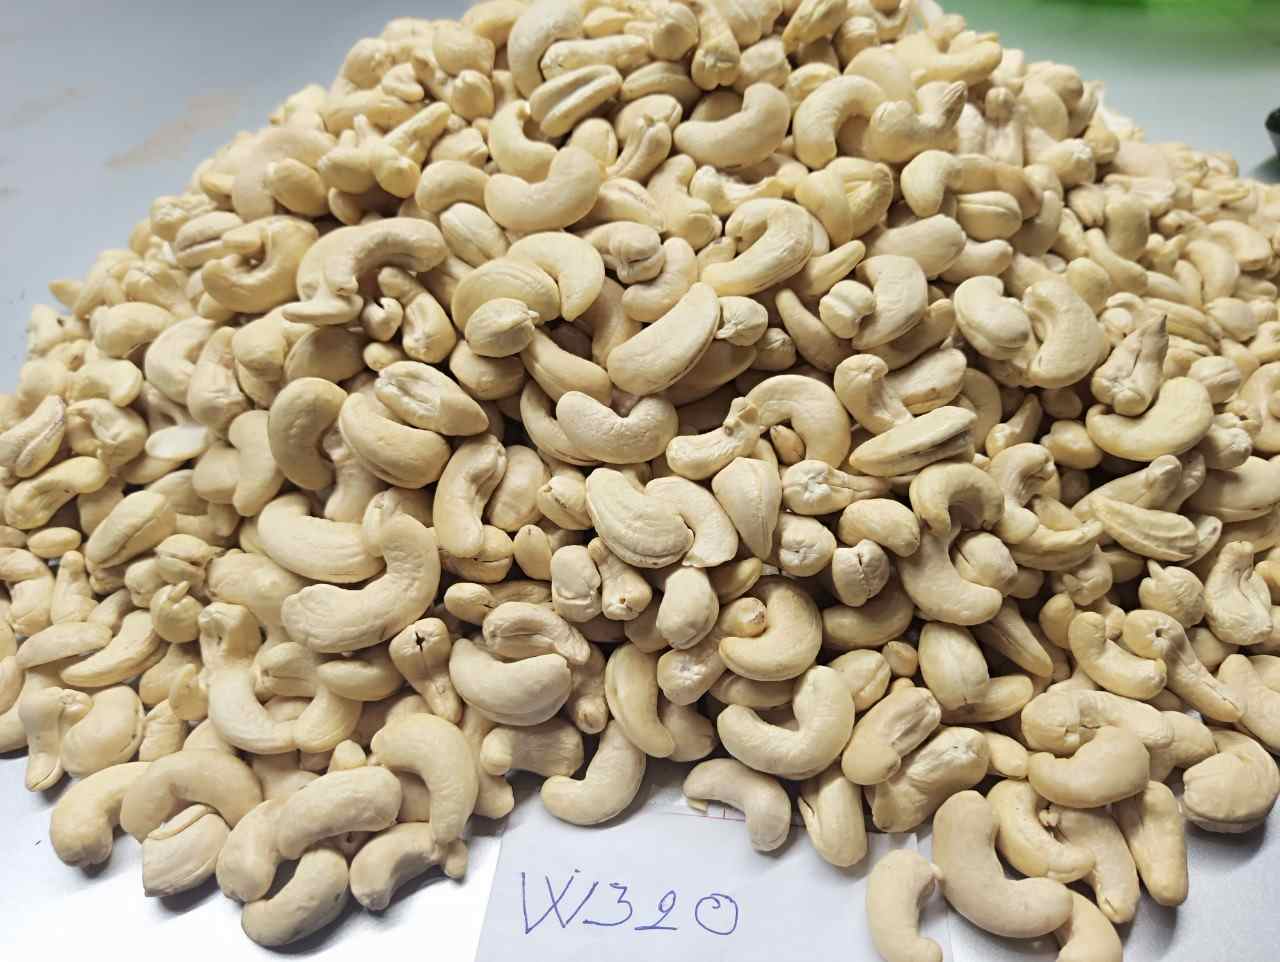 WW cashew grade is white & whole-kernels cashew with first quality of cashew nuts kernels grade.